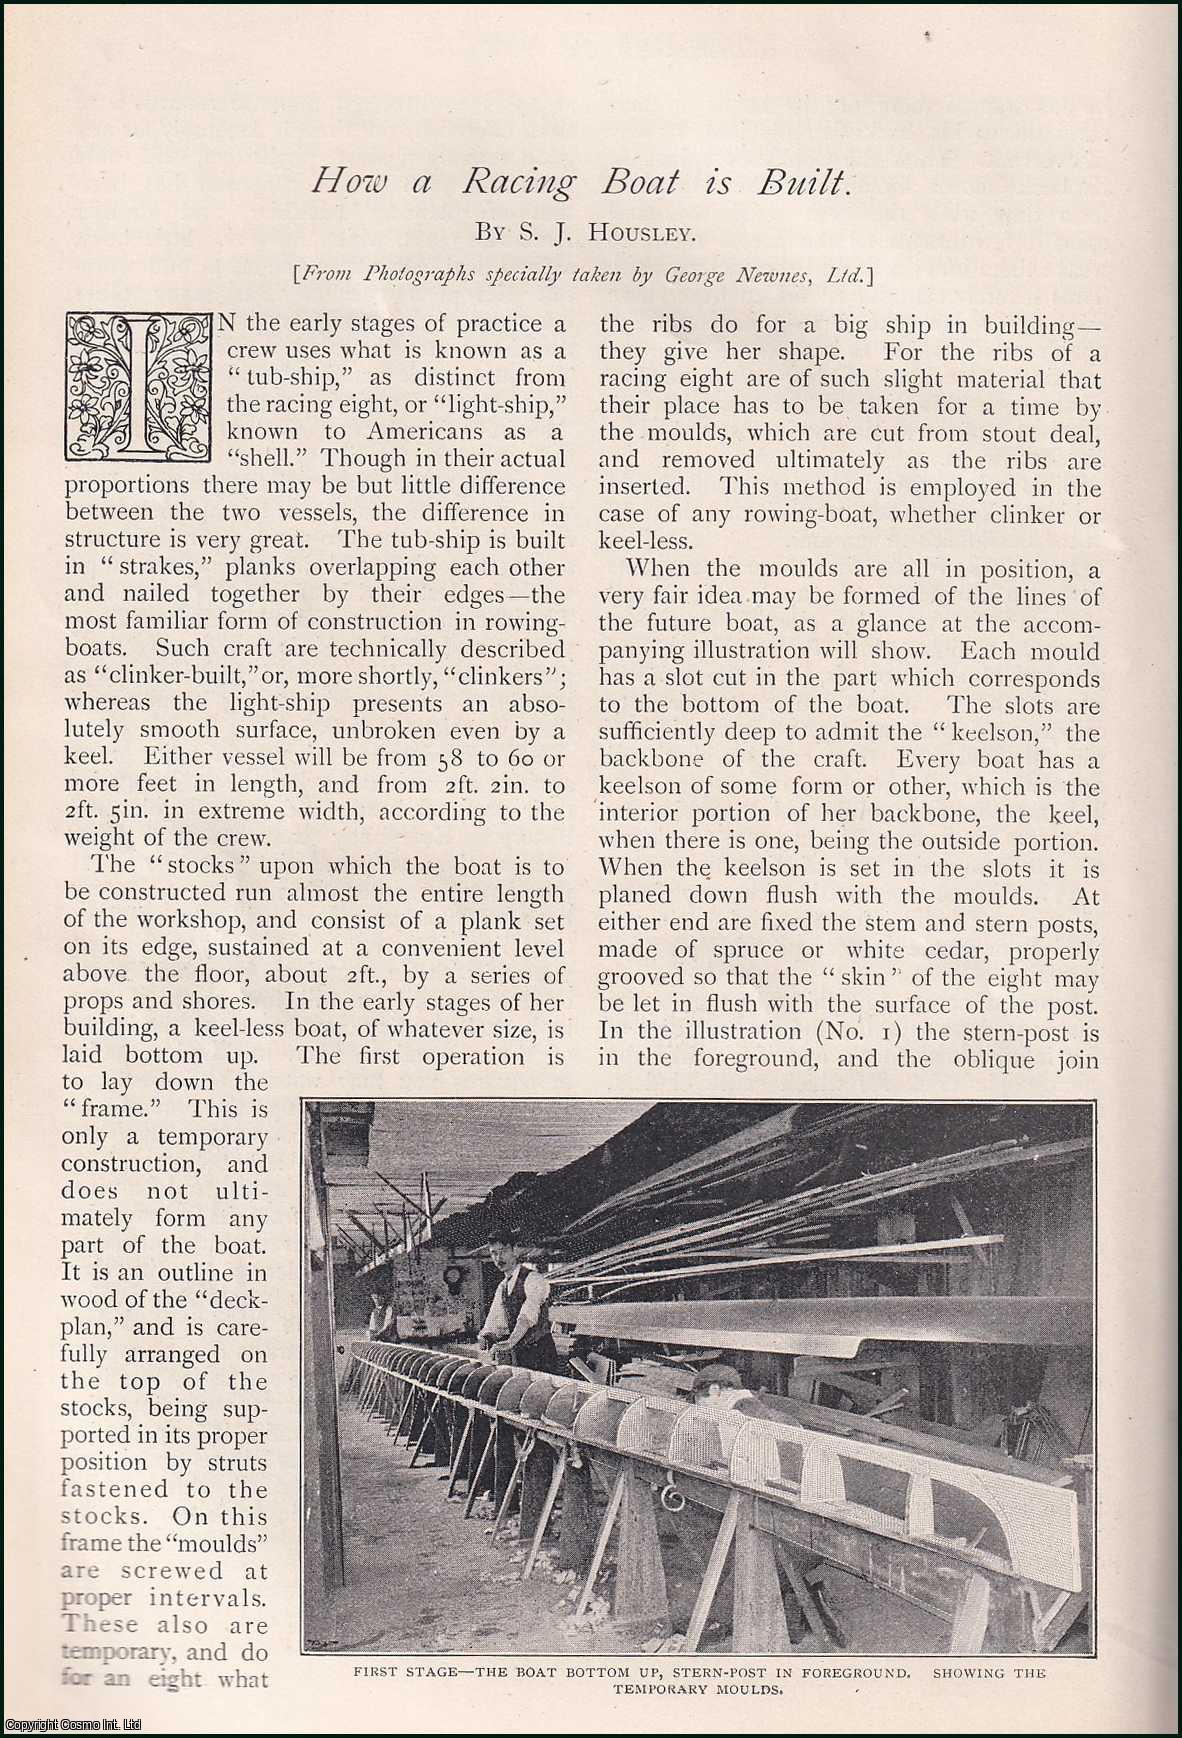 S.J. Housley - How a Racing Boat is built. An uncommon original article from The Strand Magazine, 1897.